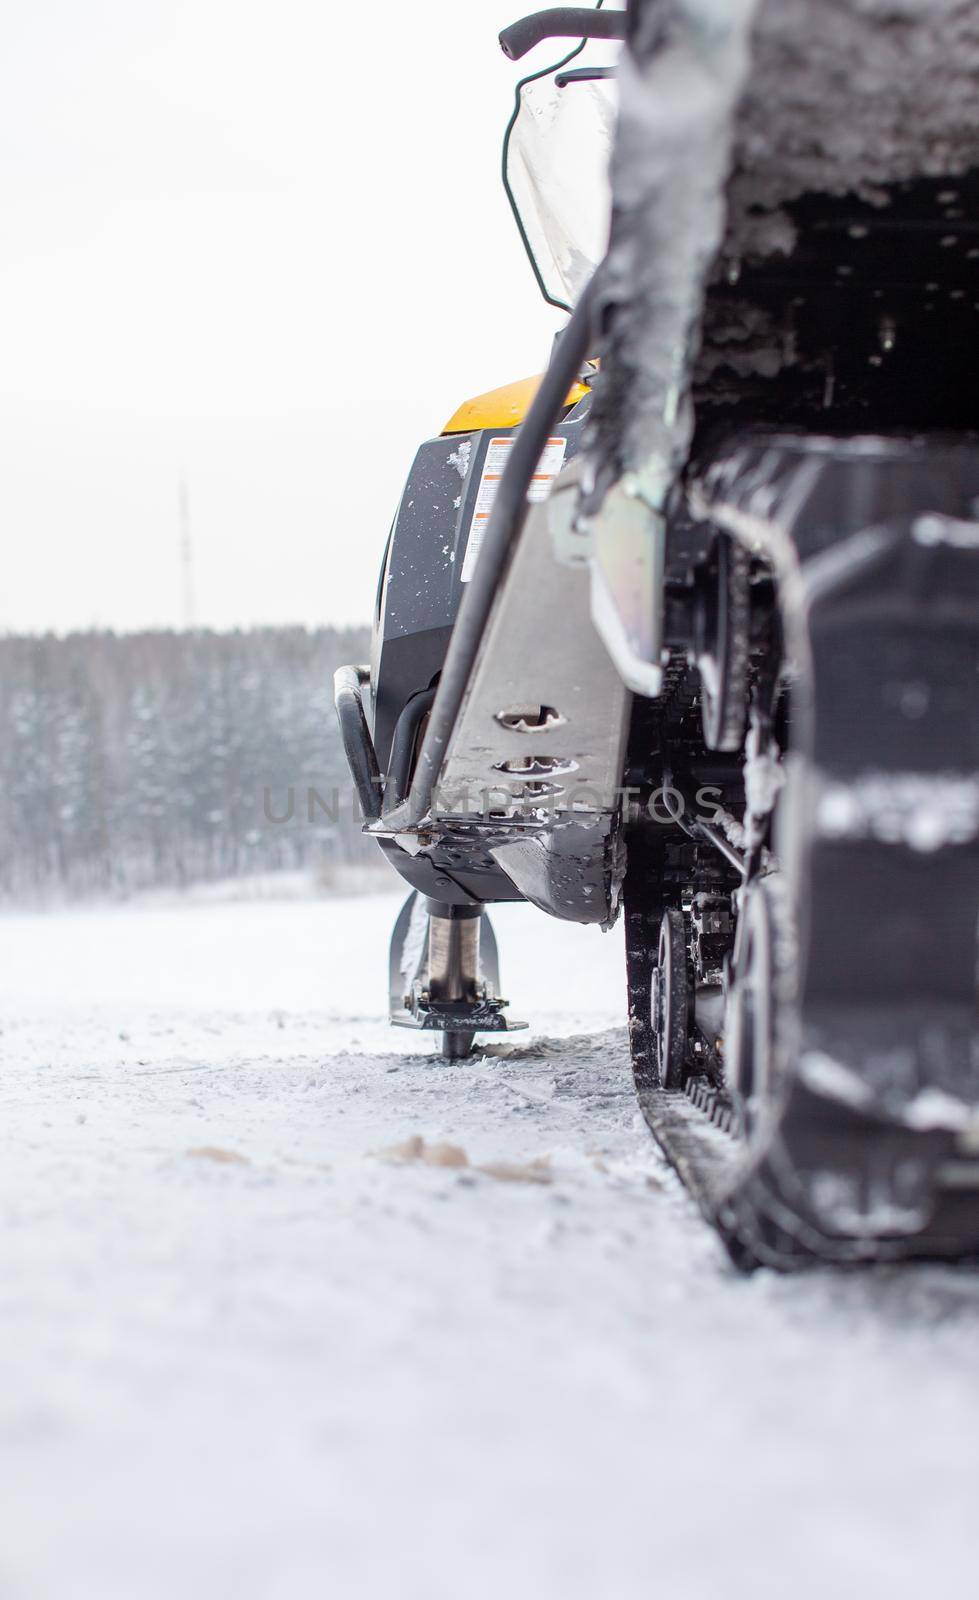 The back of the snowmobile in winter. Riding in the snow on a snowmobile. Rear suspension of a snowmobile